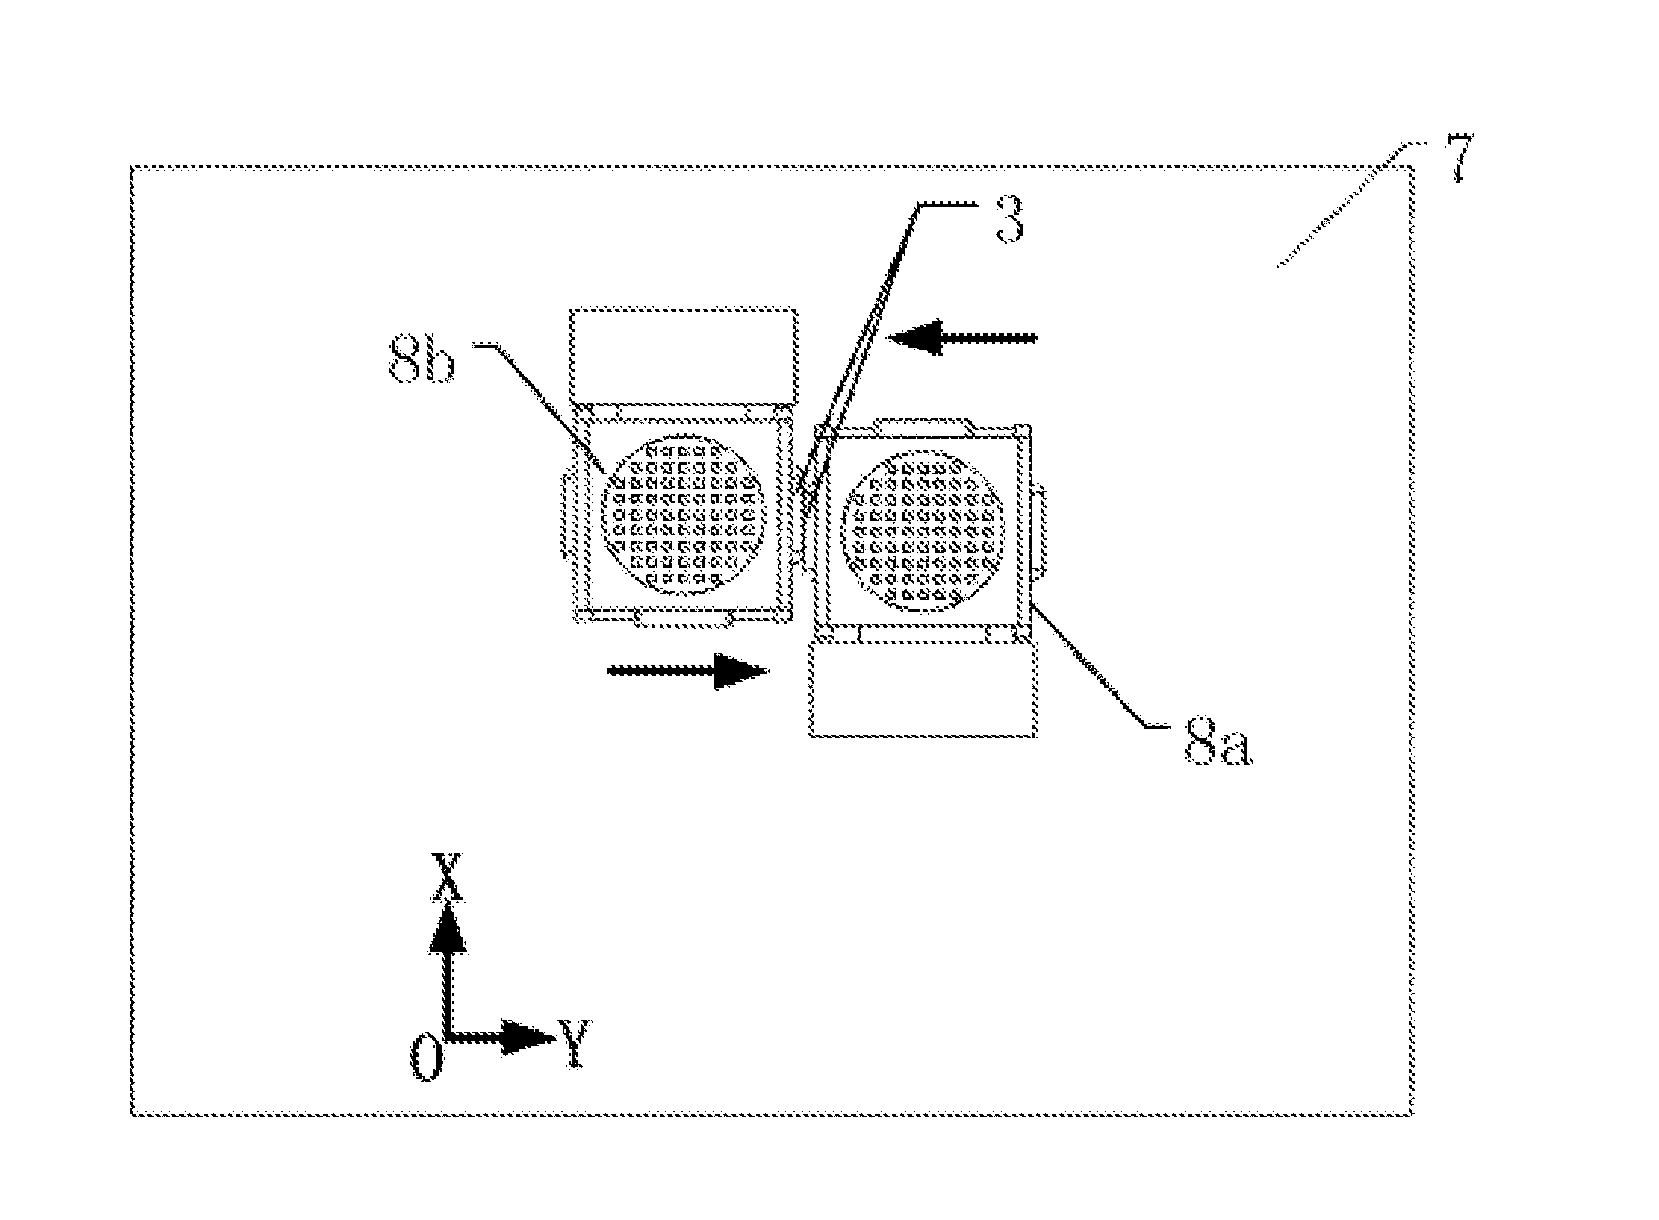 Wafer Stage Having Function of Anti-Collision